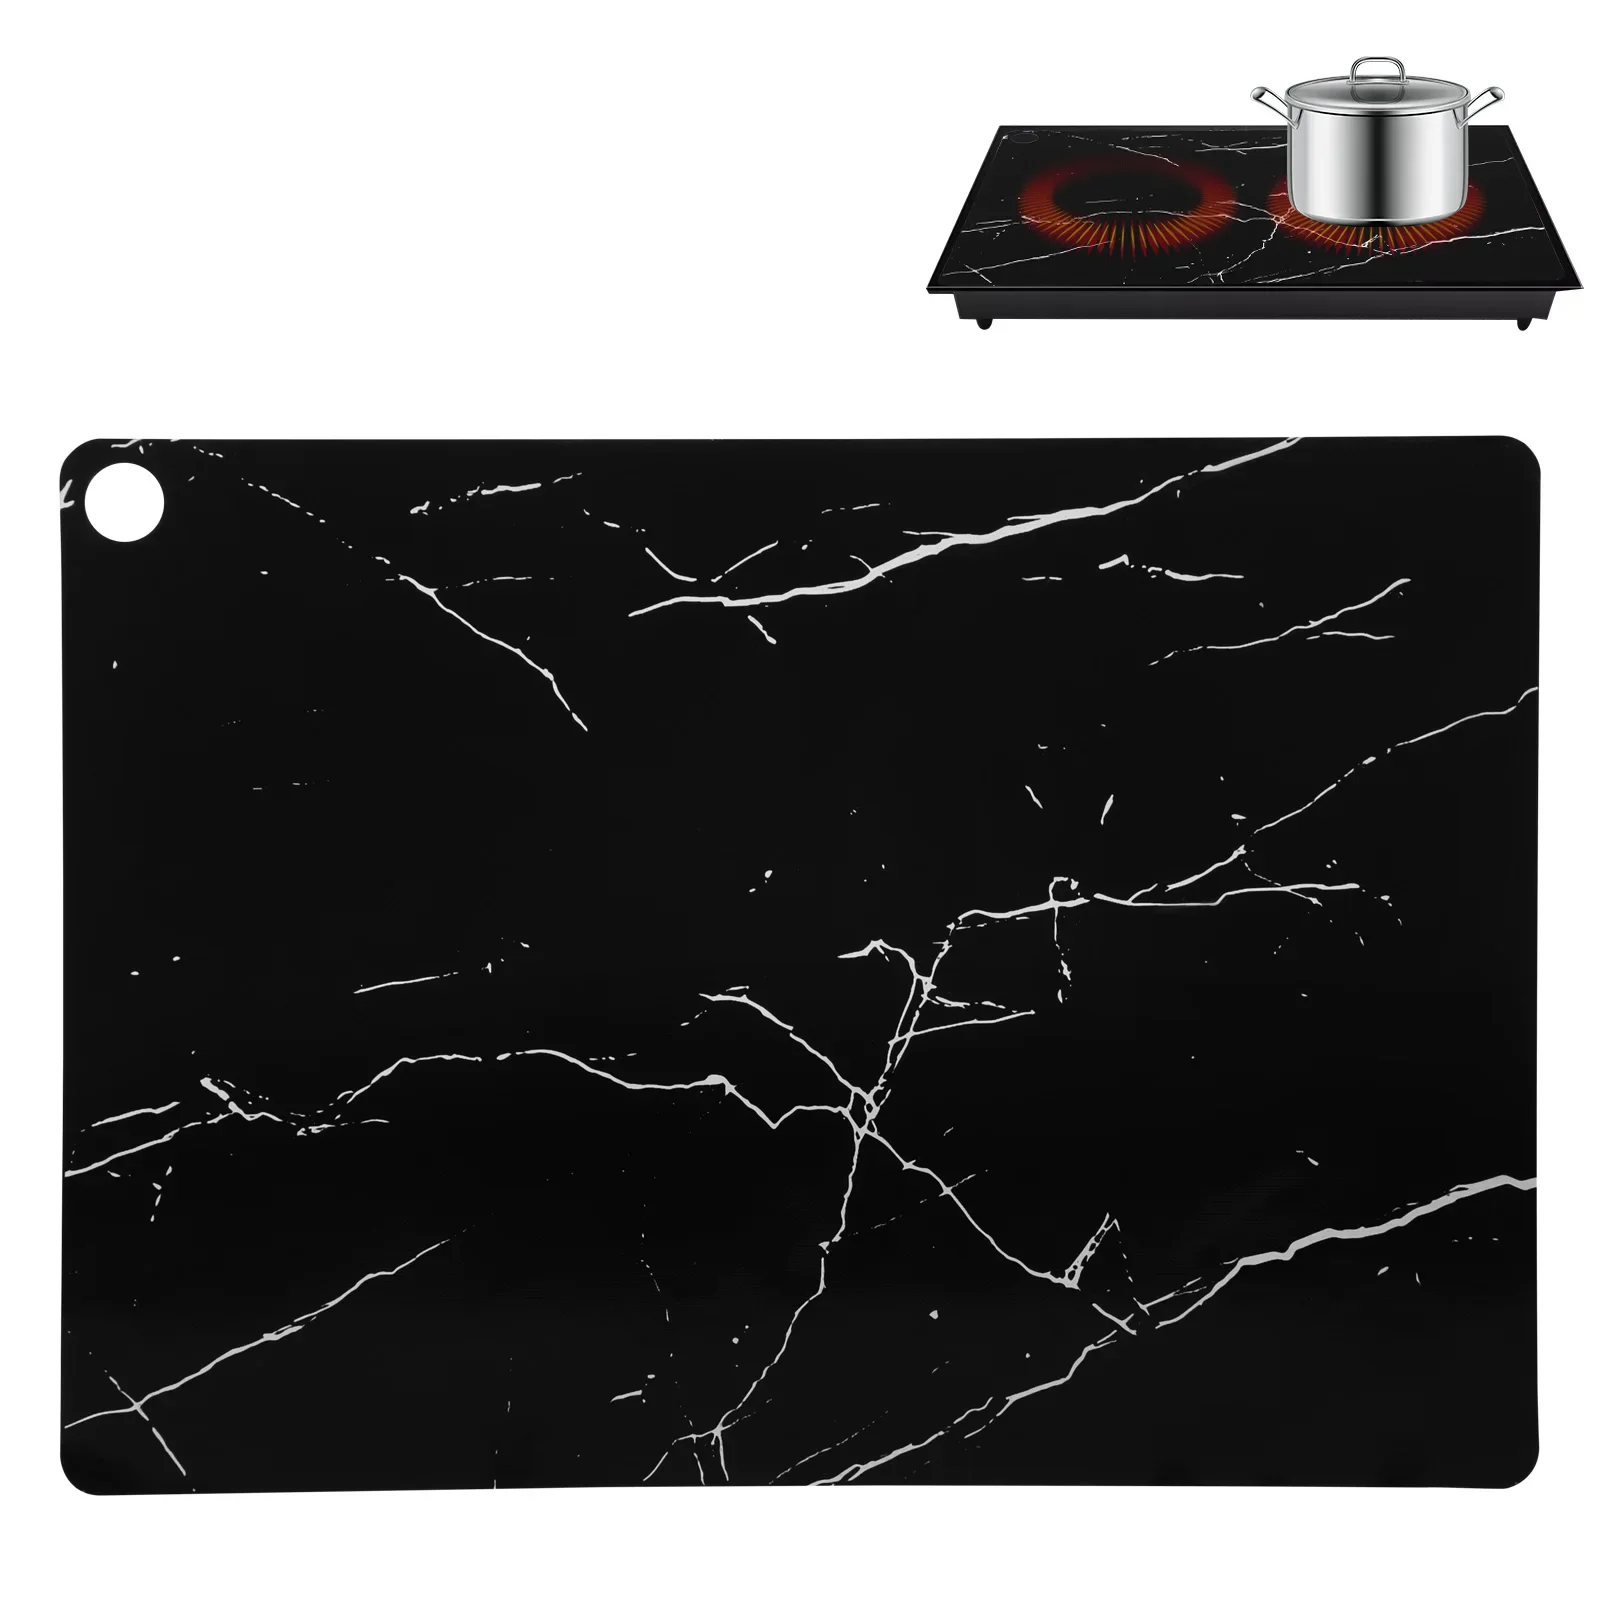 Large Induction Hob Protector Mat 52x78cm,Induction Hob Cover - Cooktop Scratch Protector Multifunctional Silicone Mats